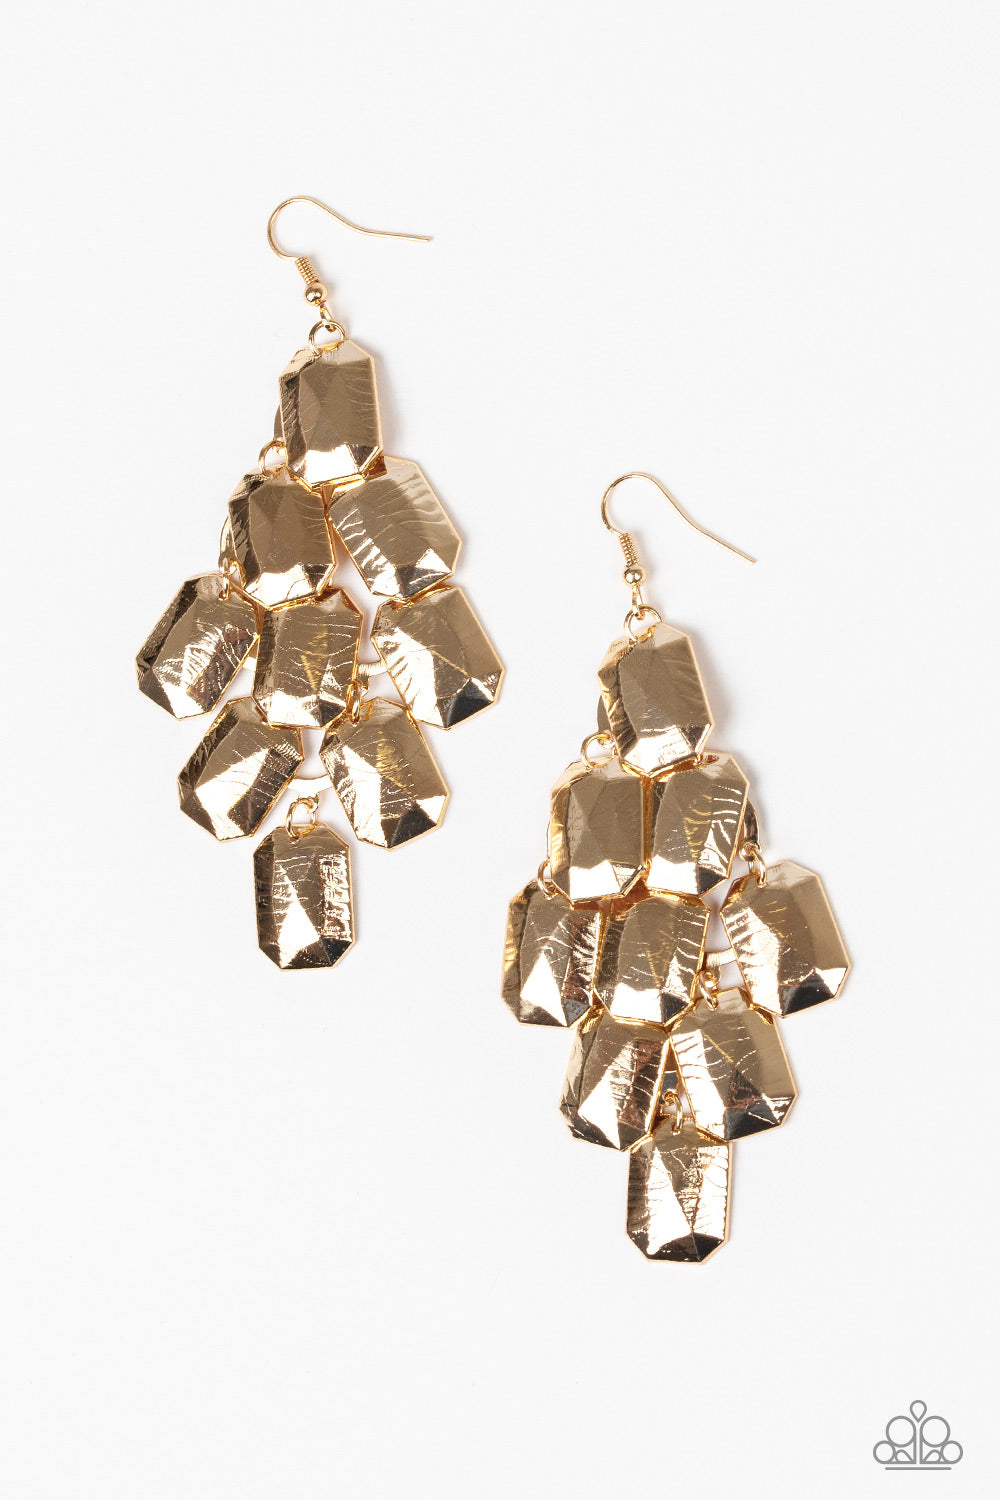 Contemporary Catwalk Gold Paparazzi Earrings Cashmere Pink Jewels - Cashmere Pink Jewels & Accessories, Cashmere Pink Jewels & Accessories - Paparazzi